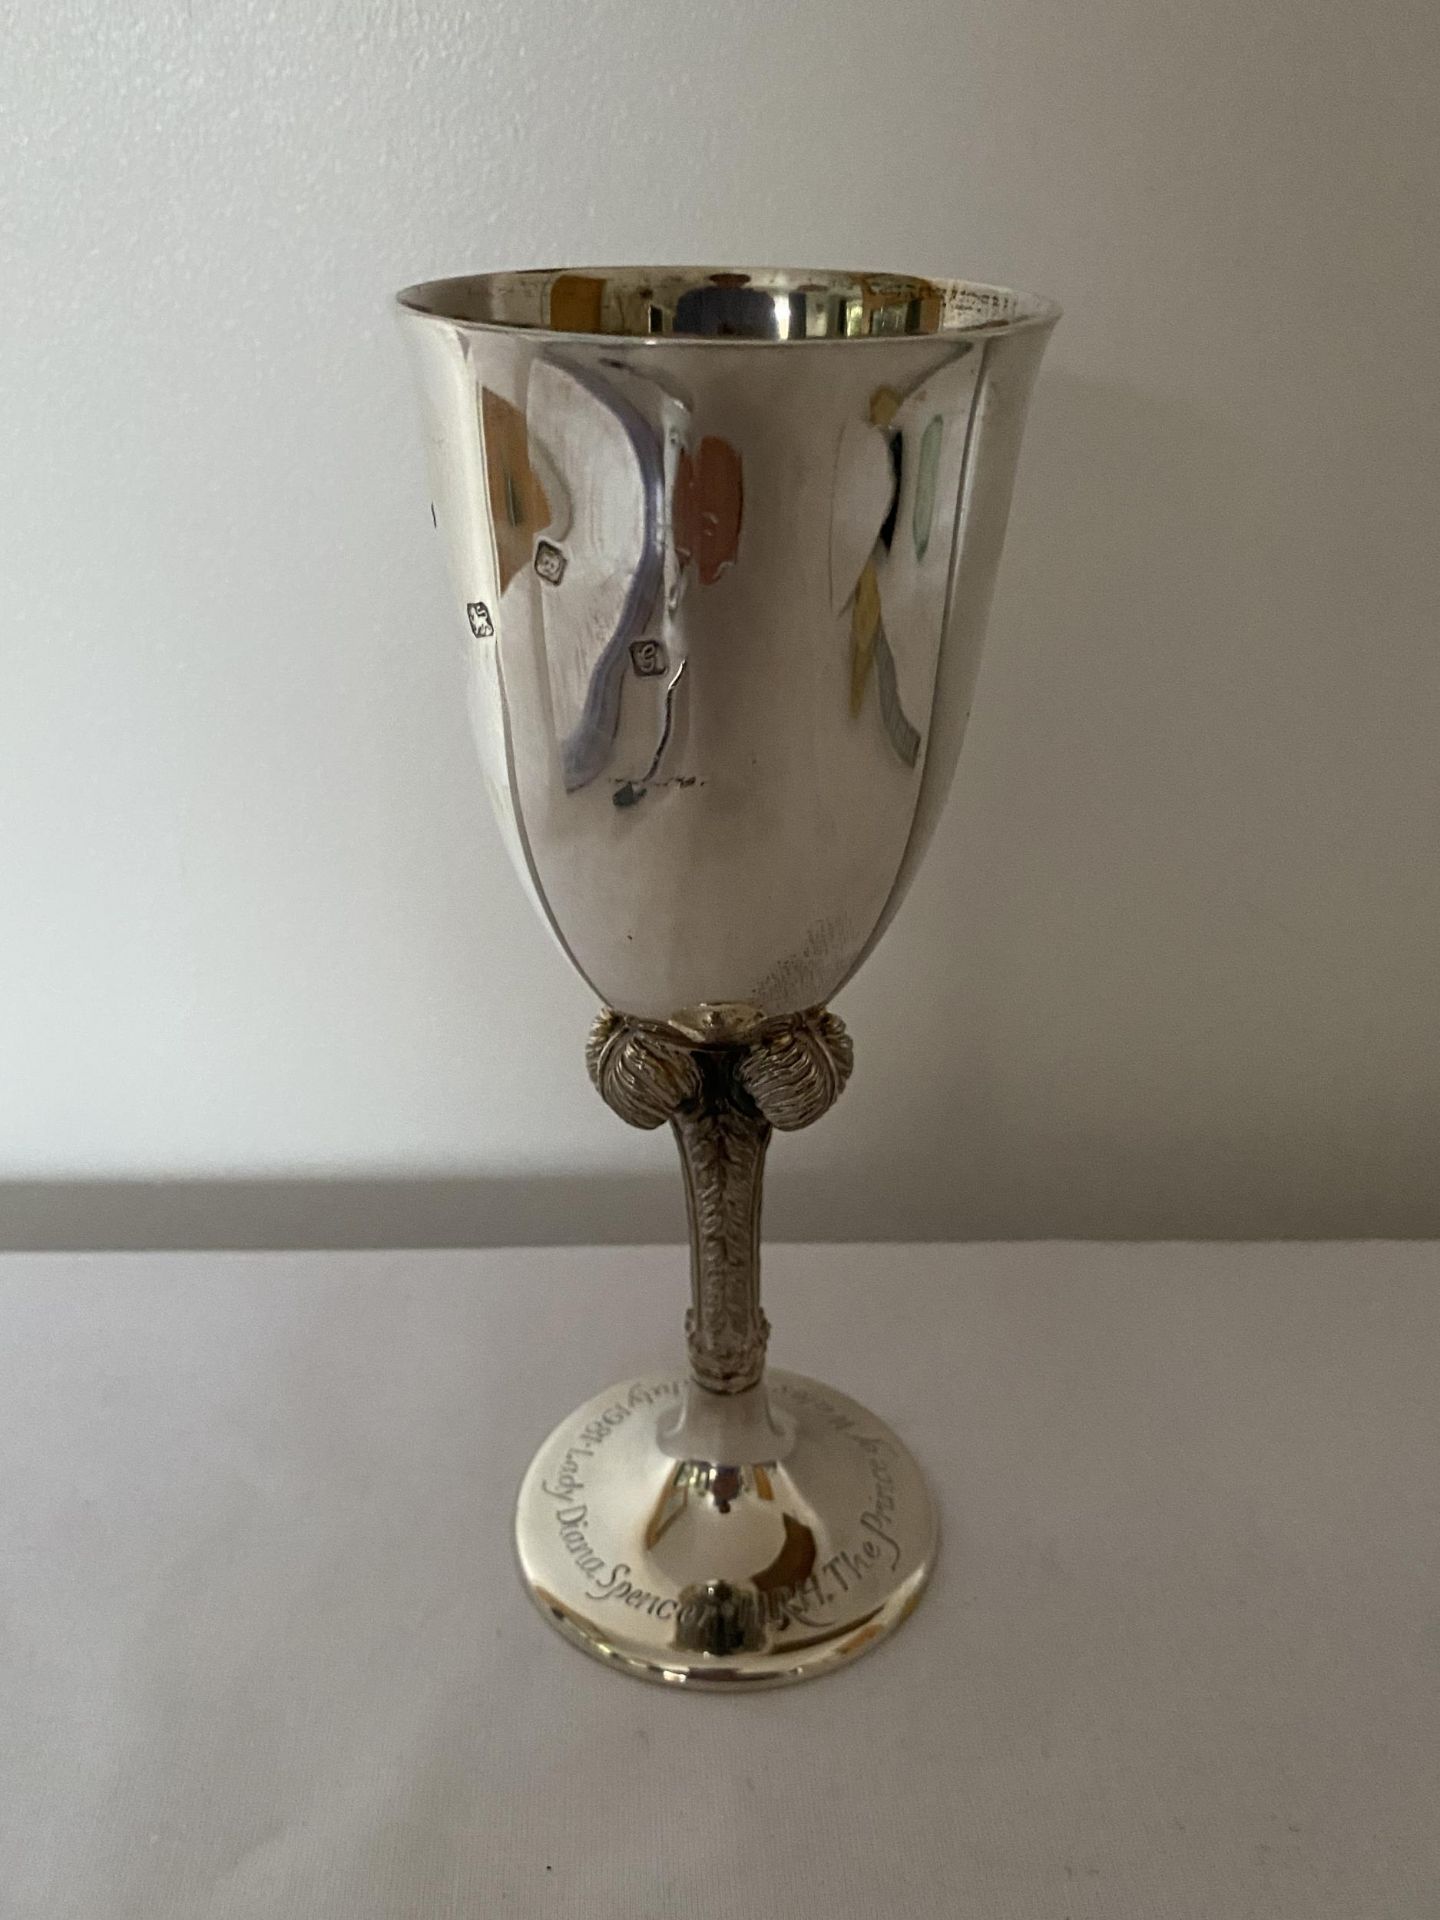 AN ELIZABETH II 1981 HALLMARKED LONDON SILVER COMMEMORATIVE LADY DIANA AND PRINCE CHARLES GOBLET - Image 6 of 24